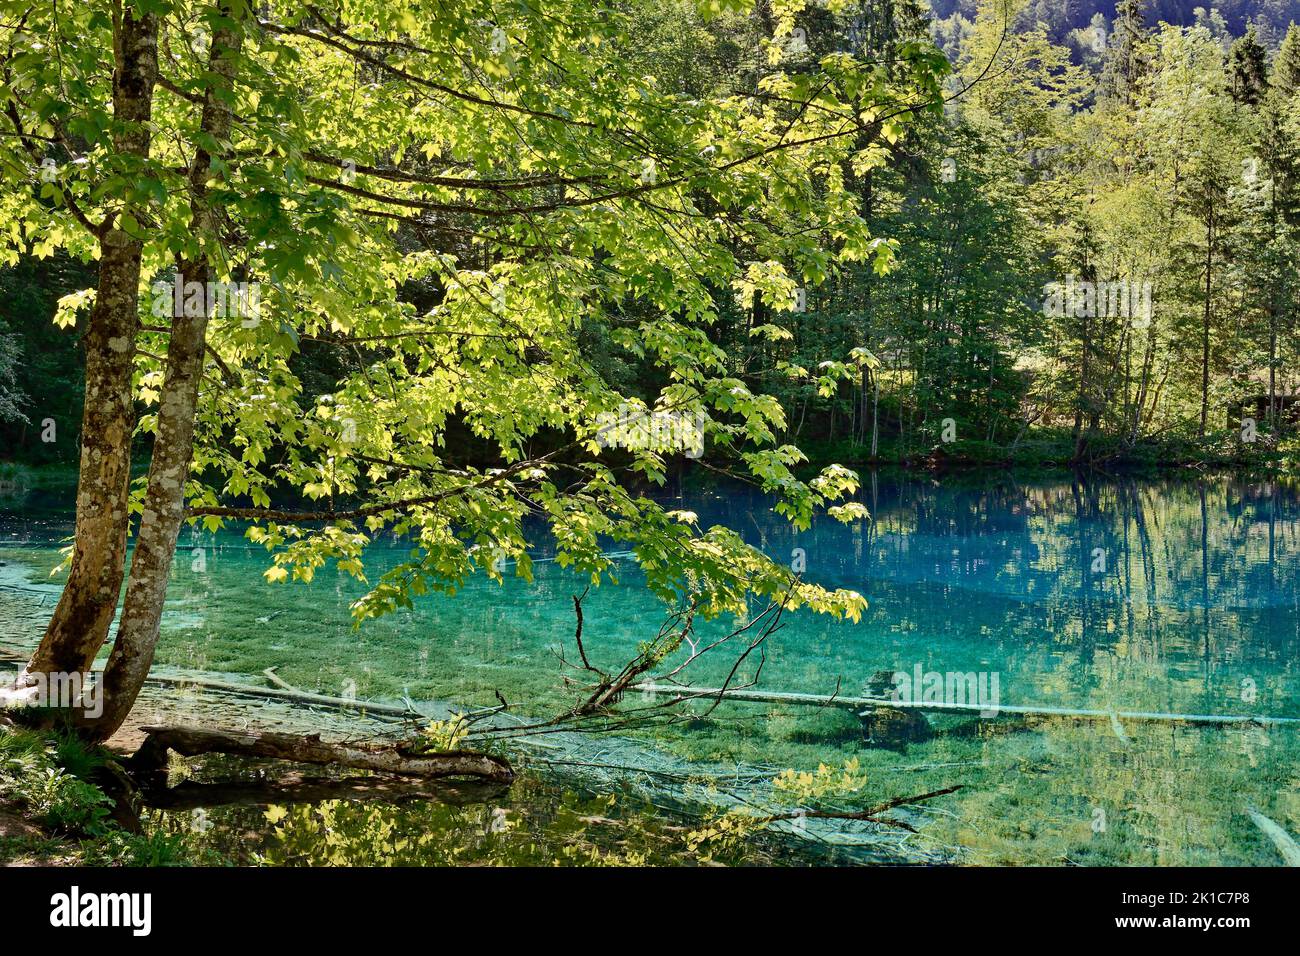 Mountain lake, Christlessee with clear turquoise water, tree trunks at the bottom of the lake, Trettachtal near Oberstdorf, Allgaeu Alps, Allgaeu Stock Photo